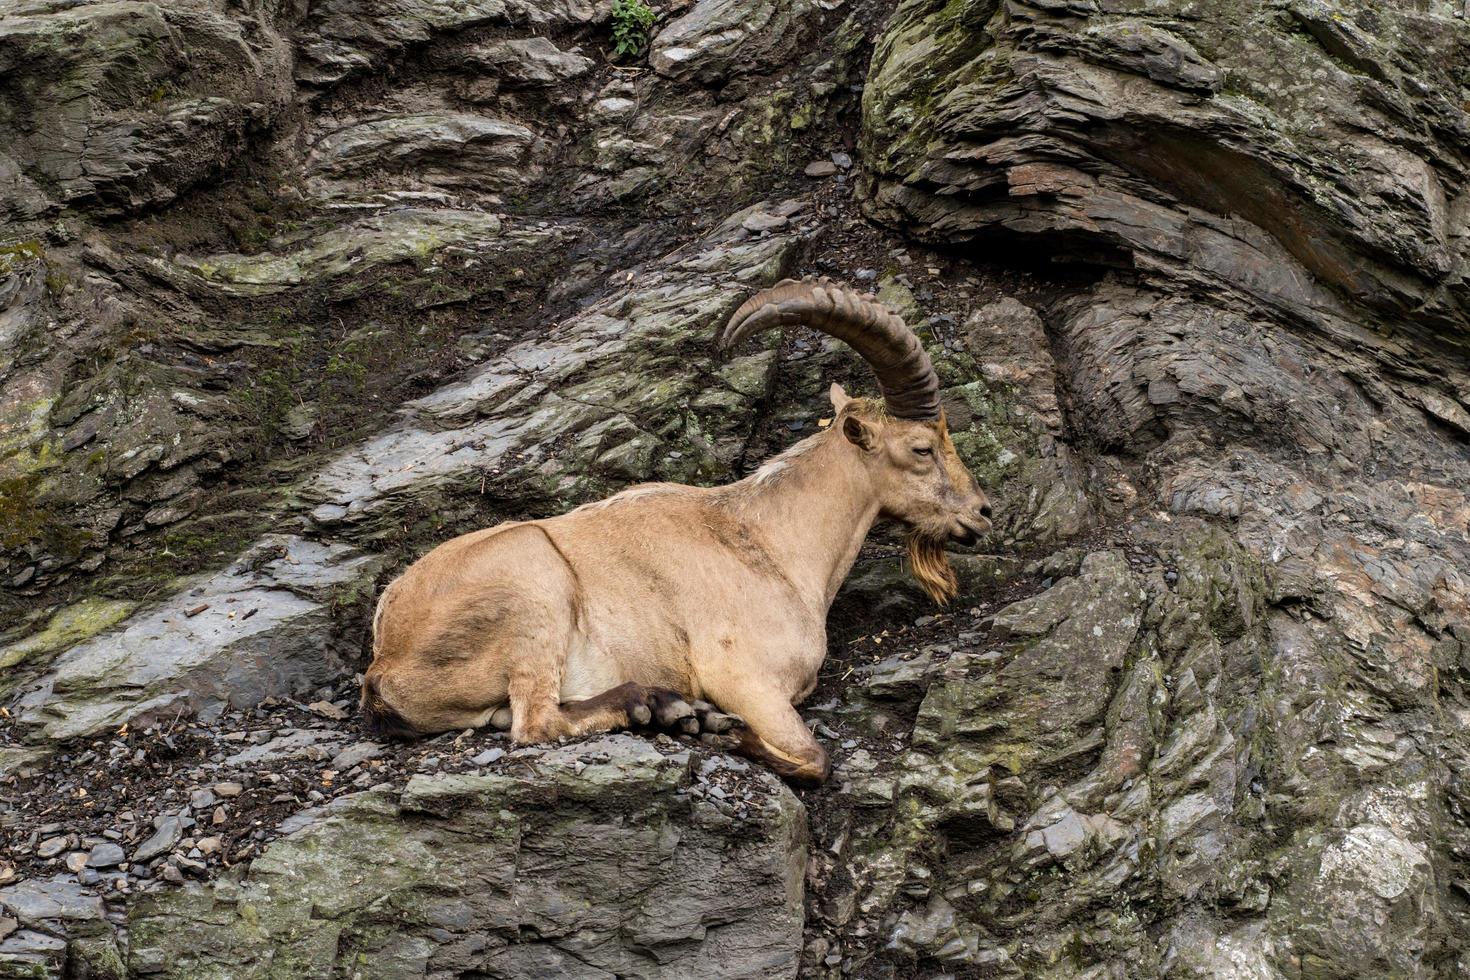 Wild mountain goat sitting on the cliff close up portrait photo